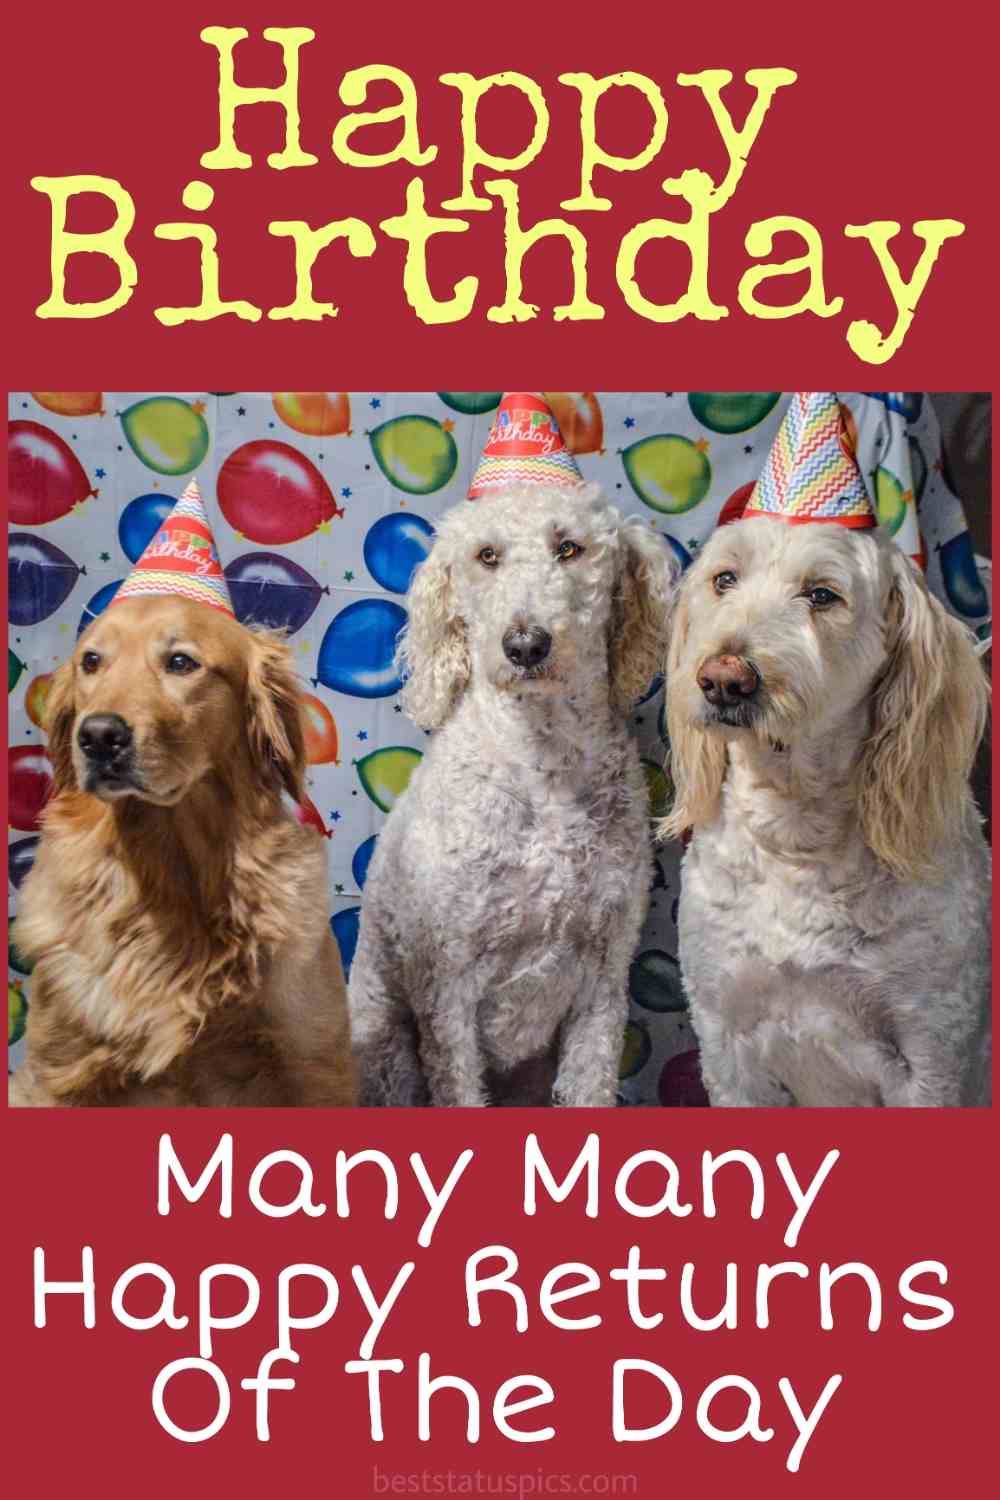 happy birthday lovely dogs images for him, her, boyfriend and girlfriend